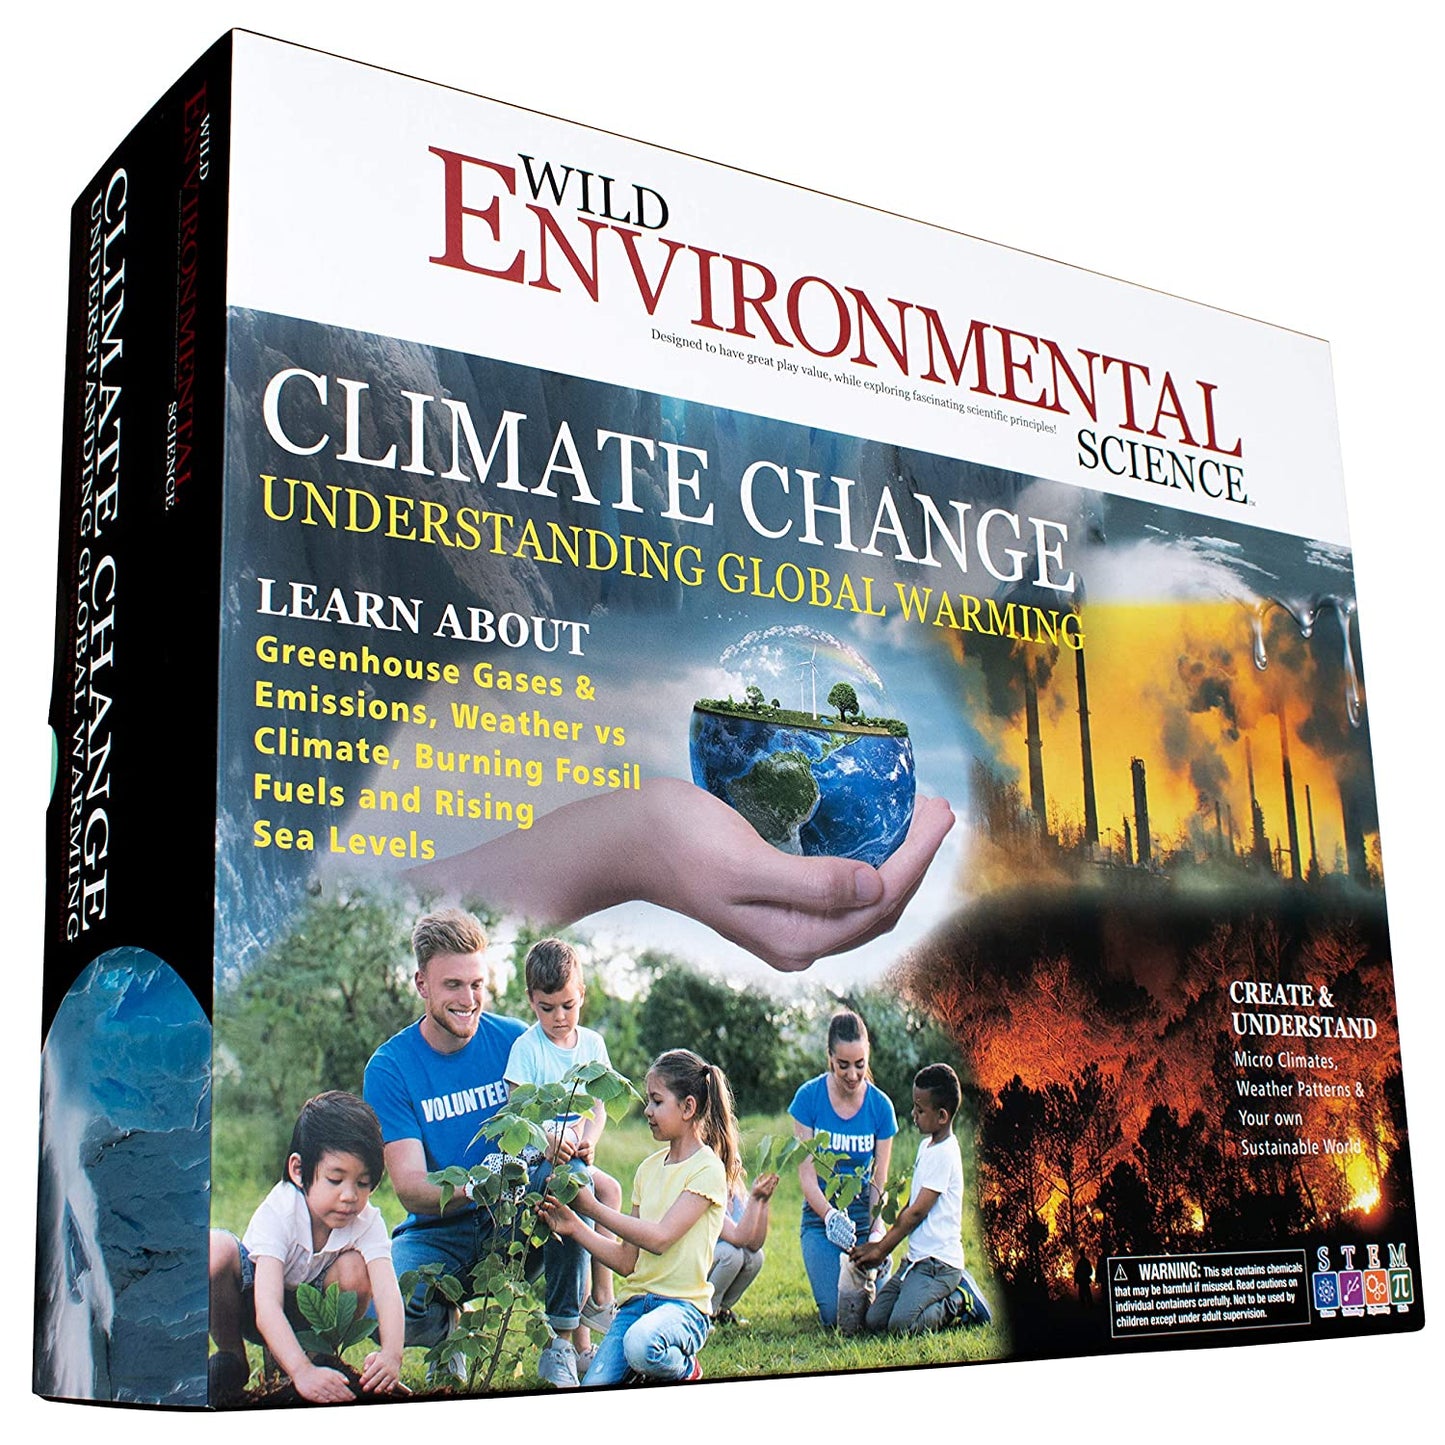 Wild Environmental Science: Climate Change